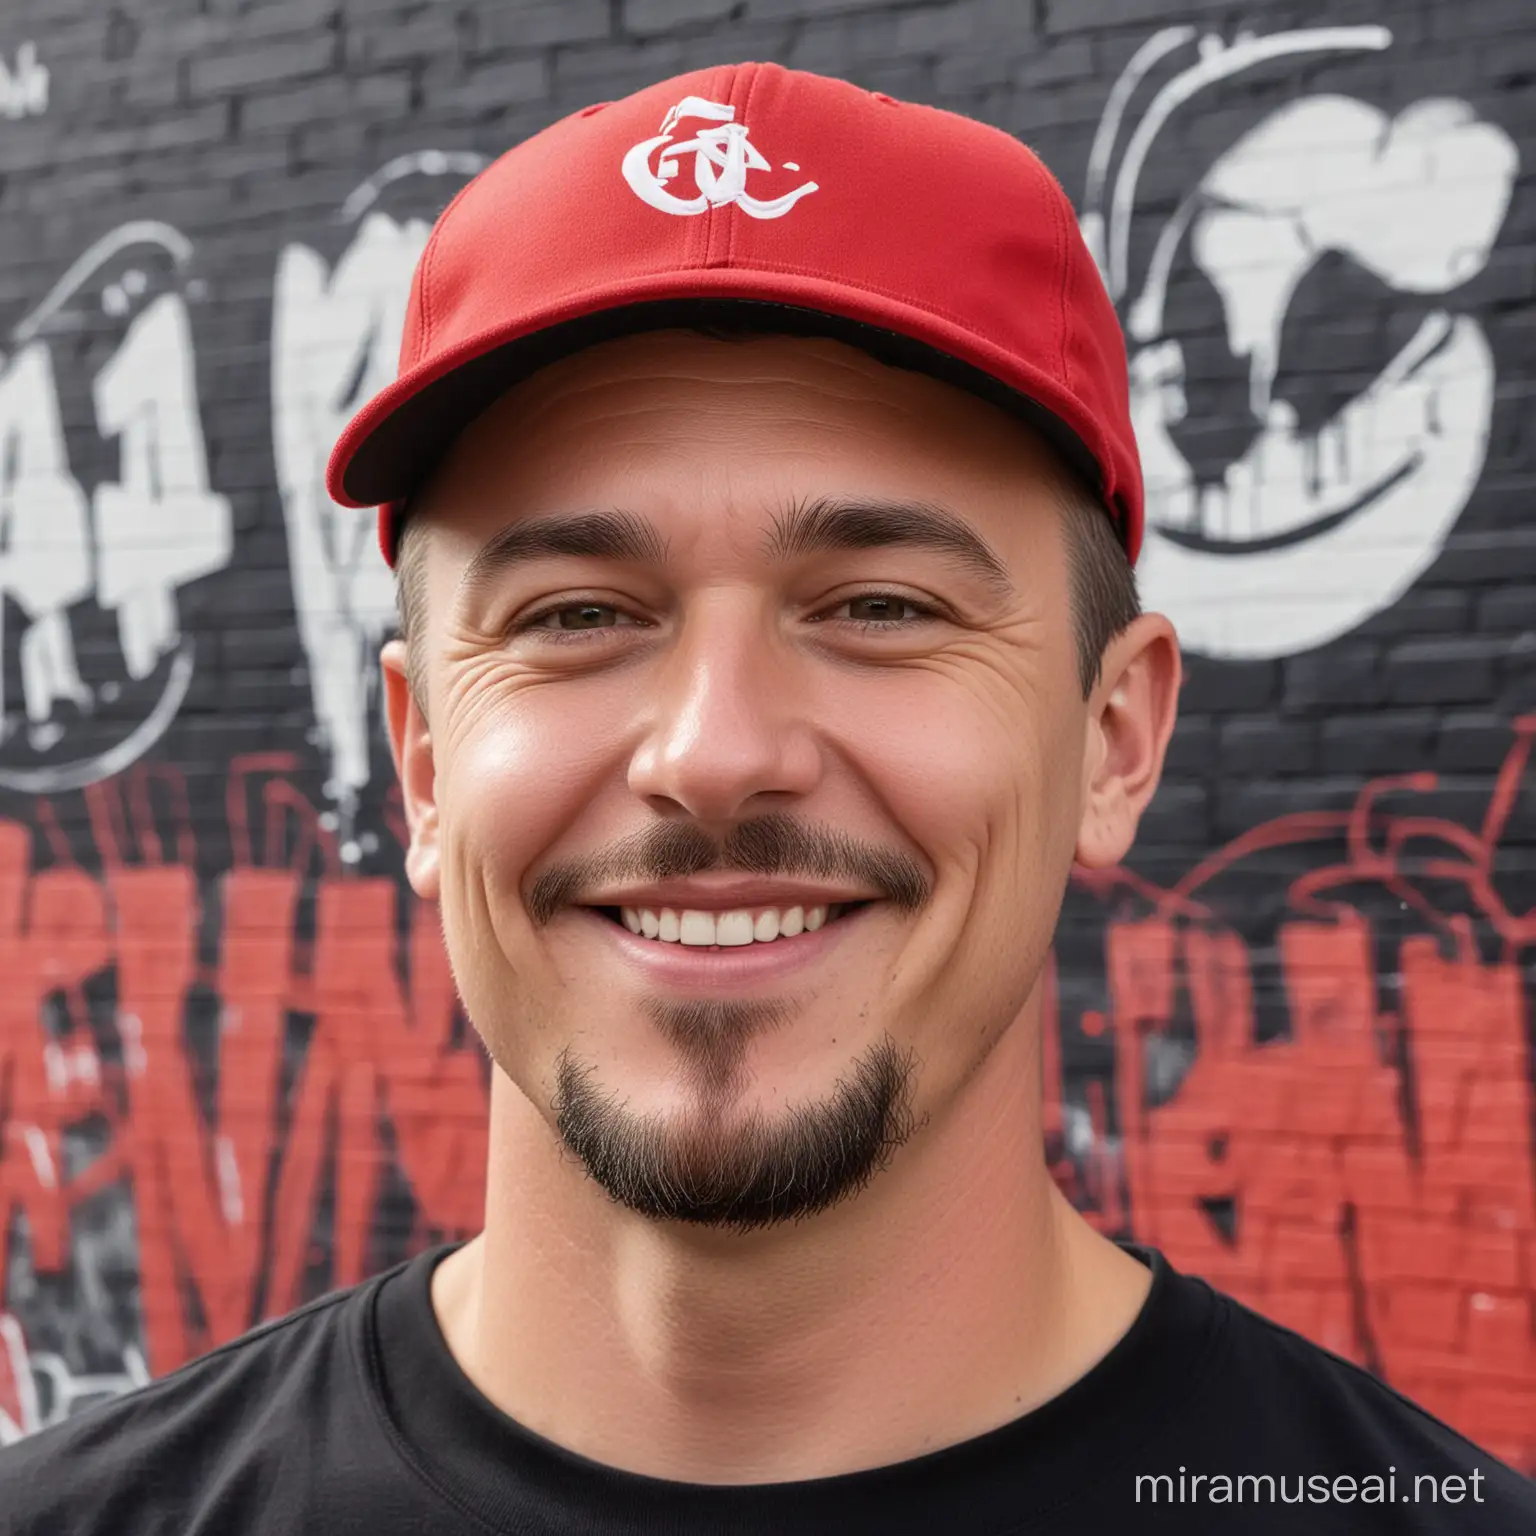 A close up portrait of a white man with a short goatee wearing a red T-shirt and black baseball cap, the man is smiling, the background is a city street with a large graffiti mural